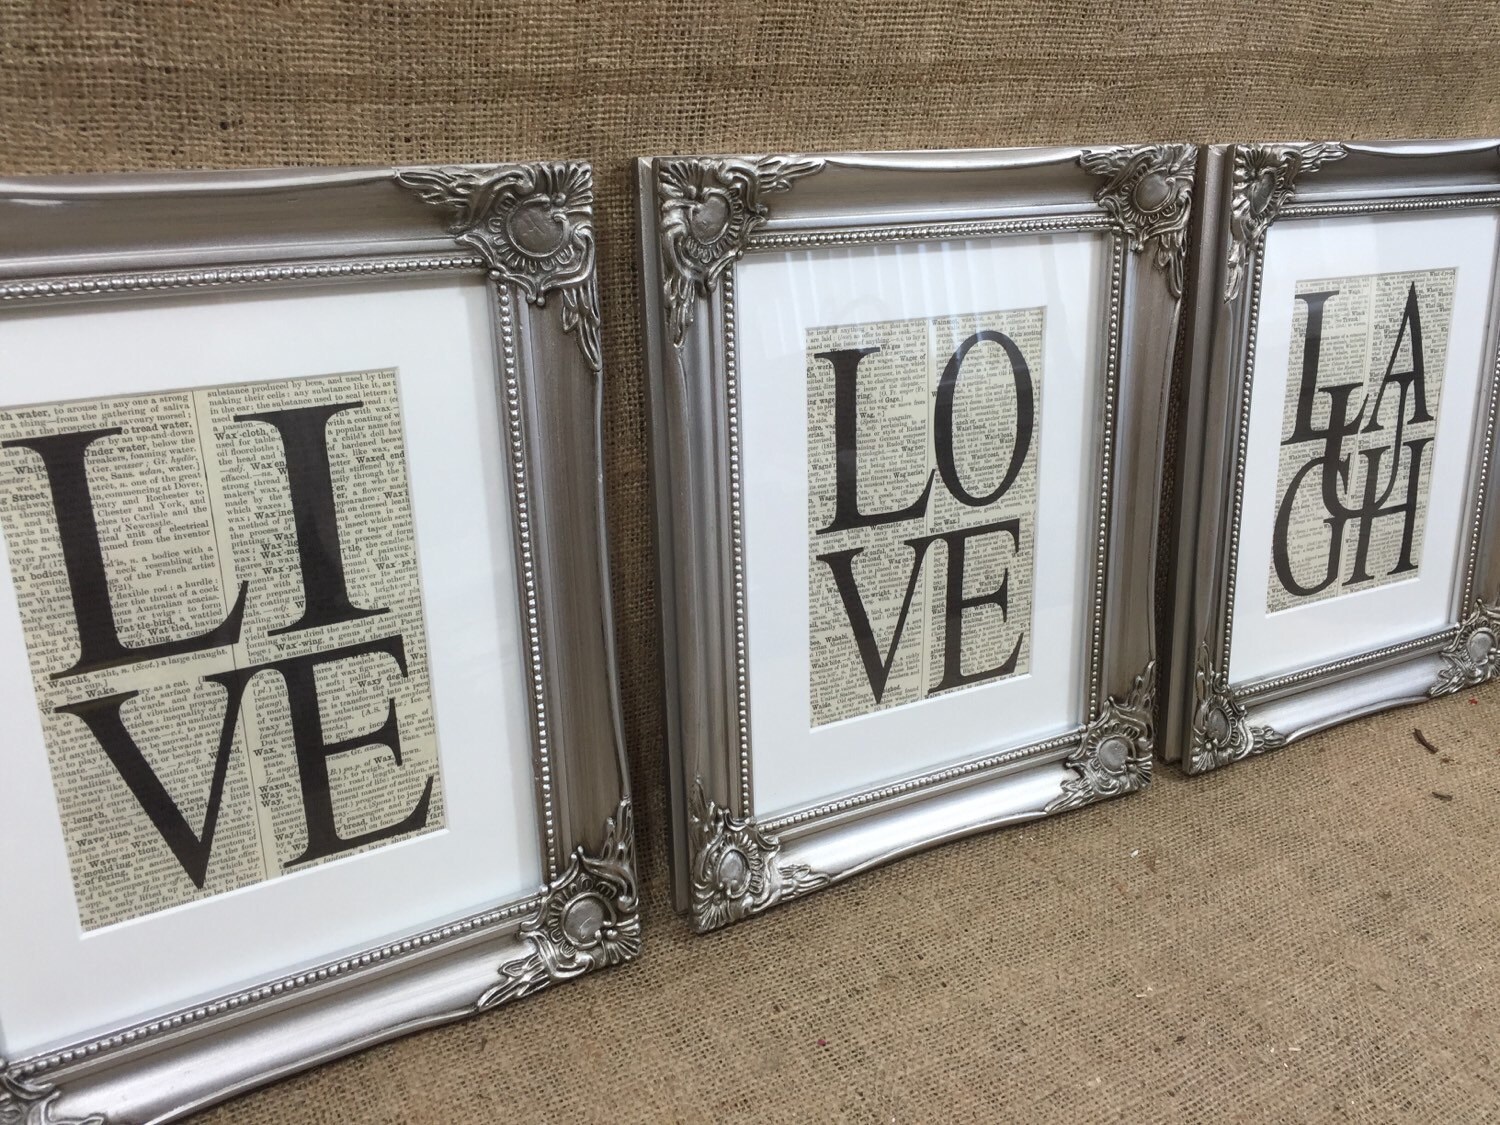 LIVE LAUGH LOVE Dictionary Prints Set of 3 Framed Word Art Prints 8x10 Silver Framed Typography Set Inspirational Words Life Quotes